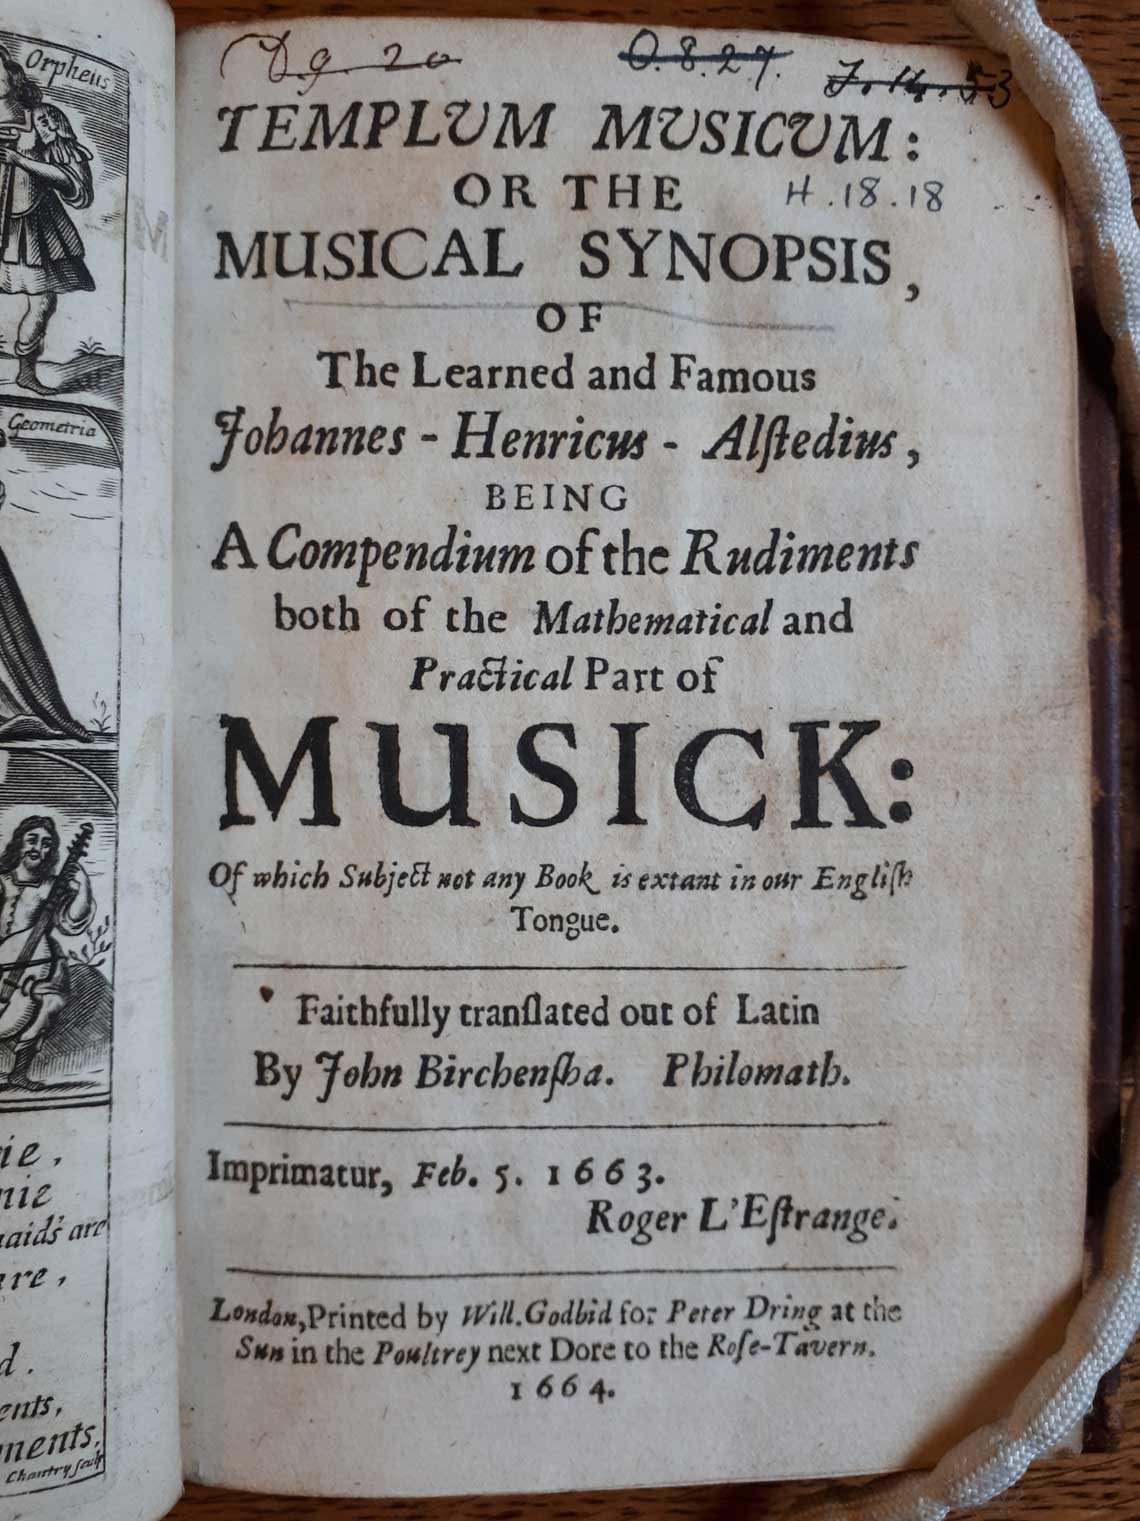 Typeset title page, reading, 'Templum music: or the musical synopsis, of the learned and famous Johannes-Henricus-Alstedius, being a compendium of the rudiments both of the mathematical and practical part of musick, of which subject not any book is extant in our English tongue. Faithfully translated out of Latin by John Birchensha. Philomath.'